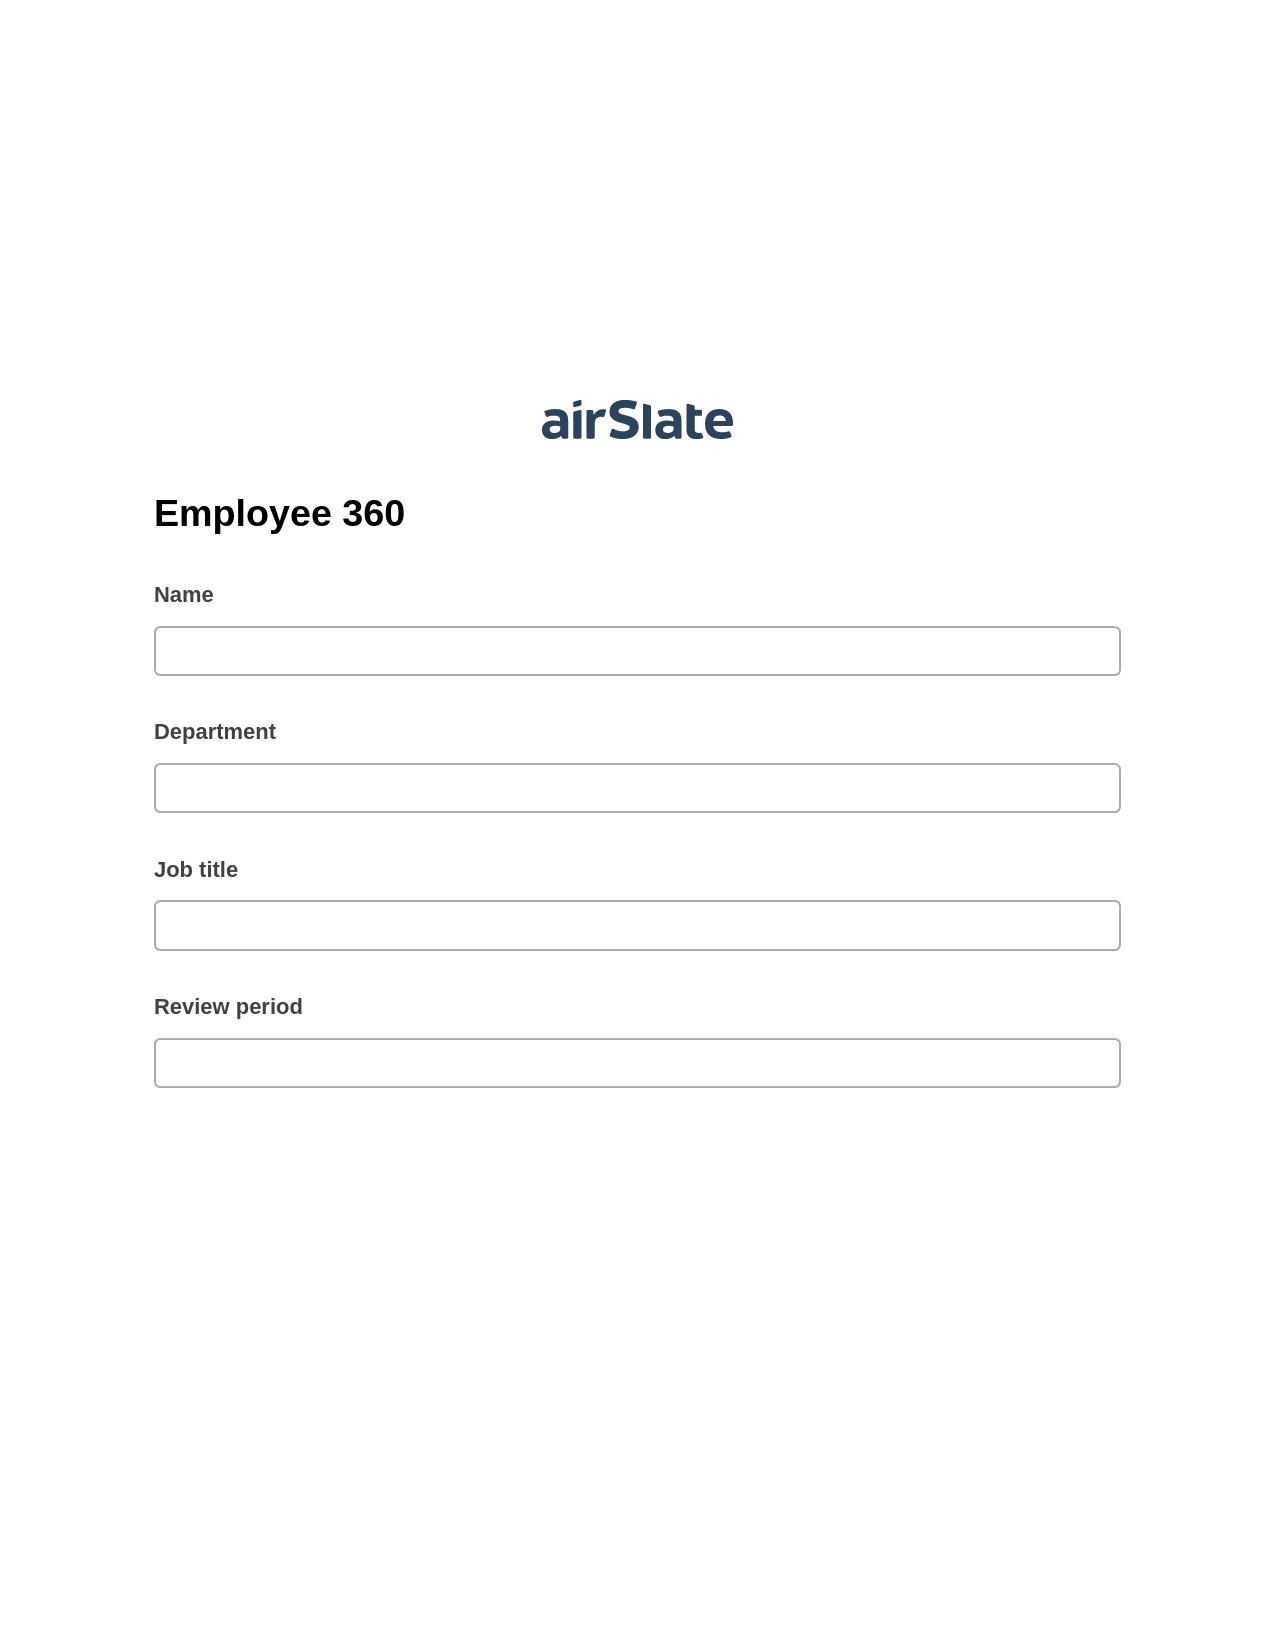 Multirole Employee 360 Pre-fill from CSV File Bot, Send a Slate with Roles Bot, Export to WebMerge Bot